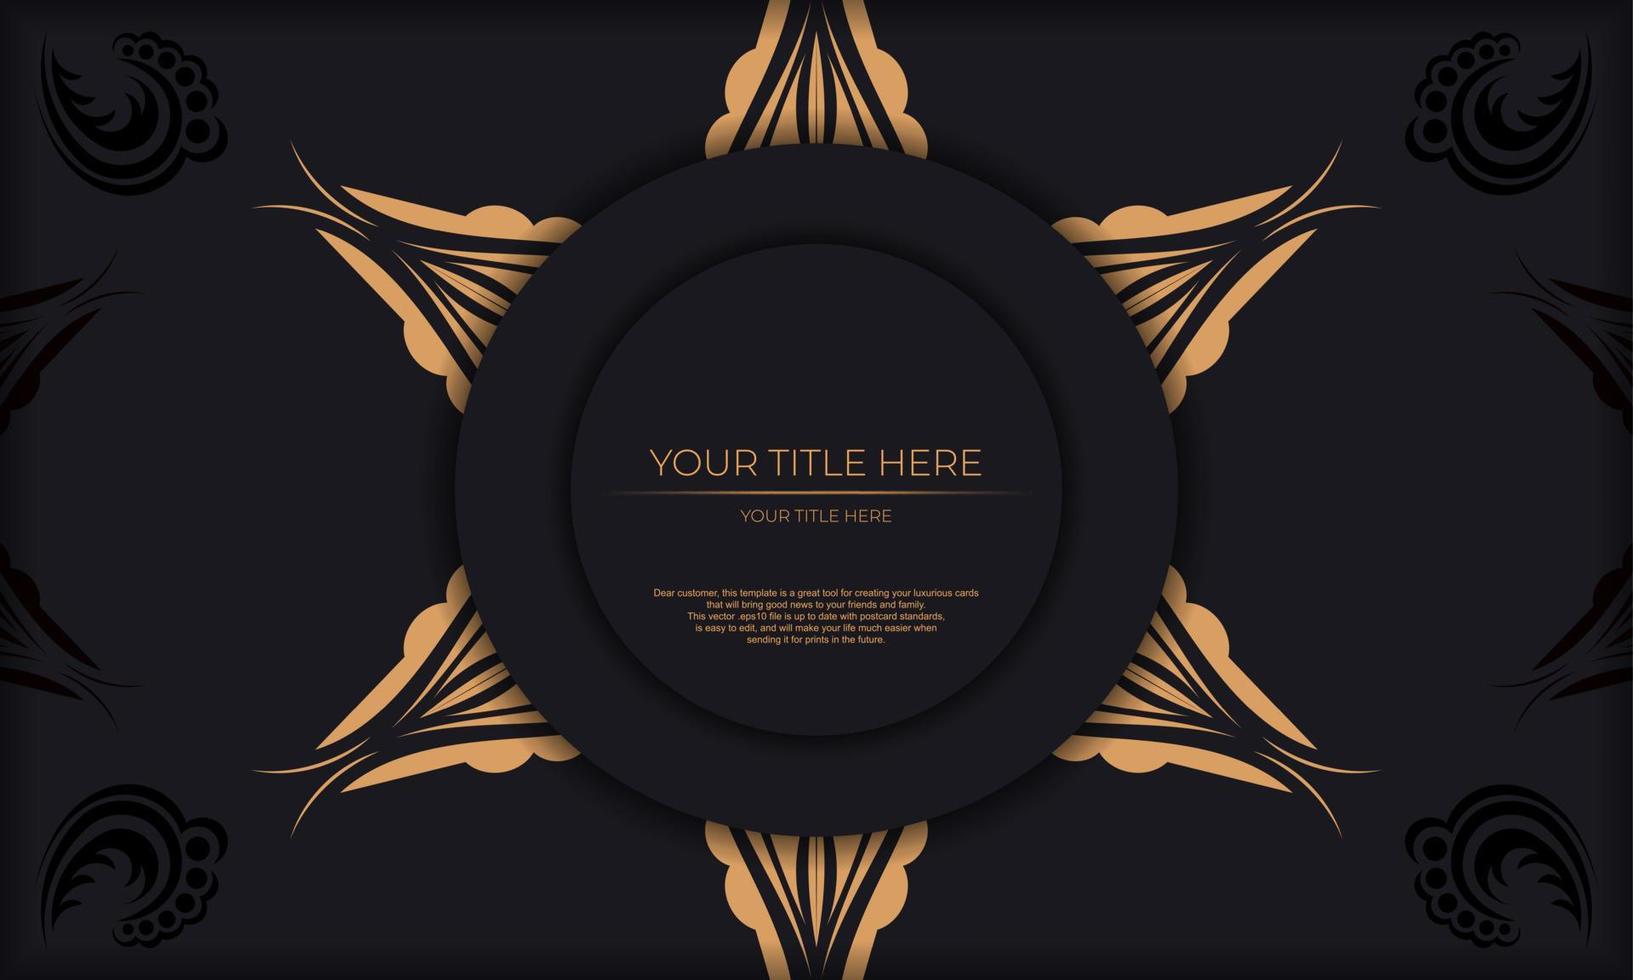 Luxurious black postcard template with vintage abstract ornament. Elegant and classic elements are great for decorating. Vector illustration.